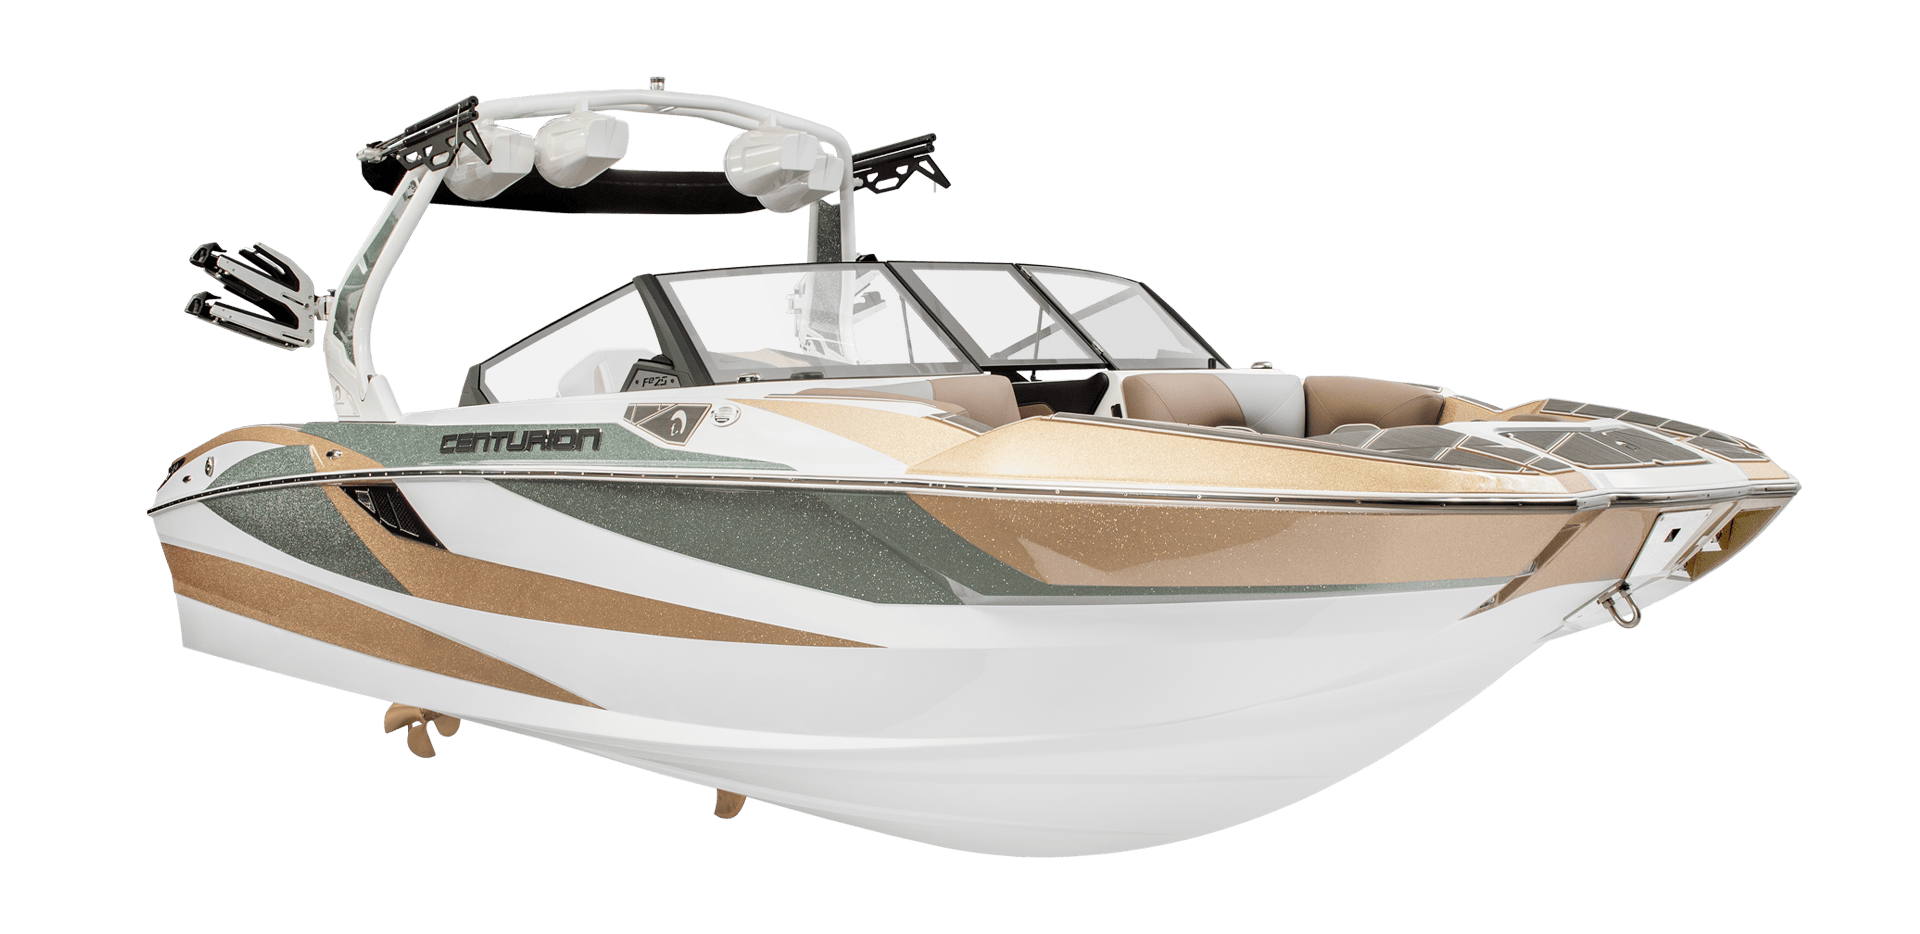 A luxurious Centurion speedboat featuring a modern design with a white, green, and gold color scheme, fitted with advanced audio and navigation equipment.